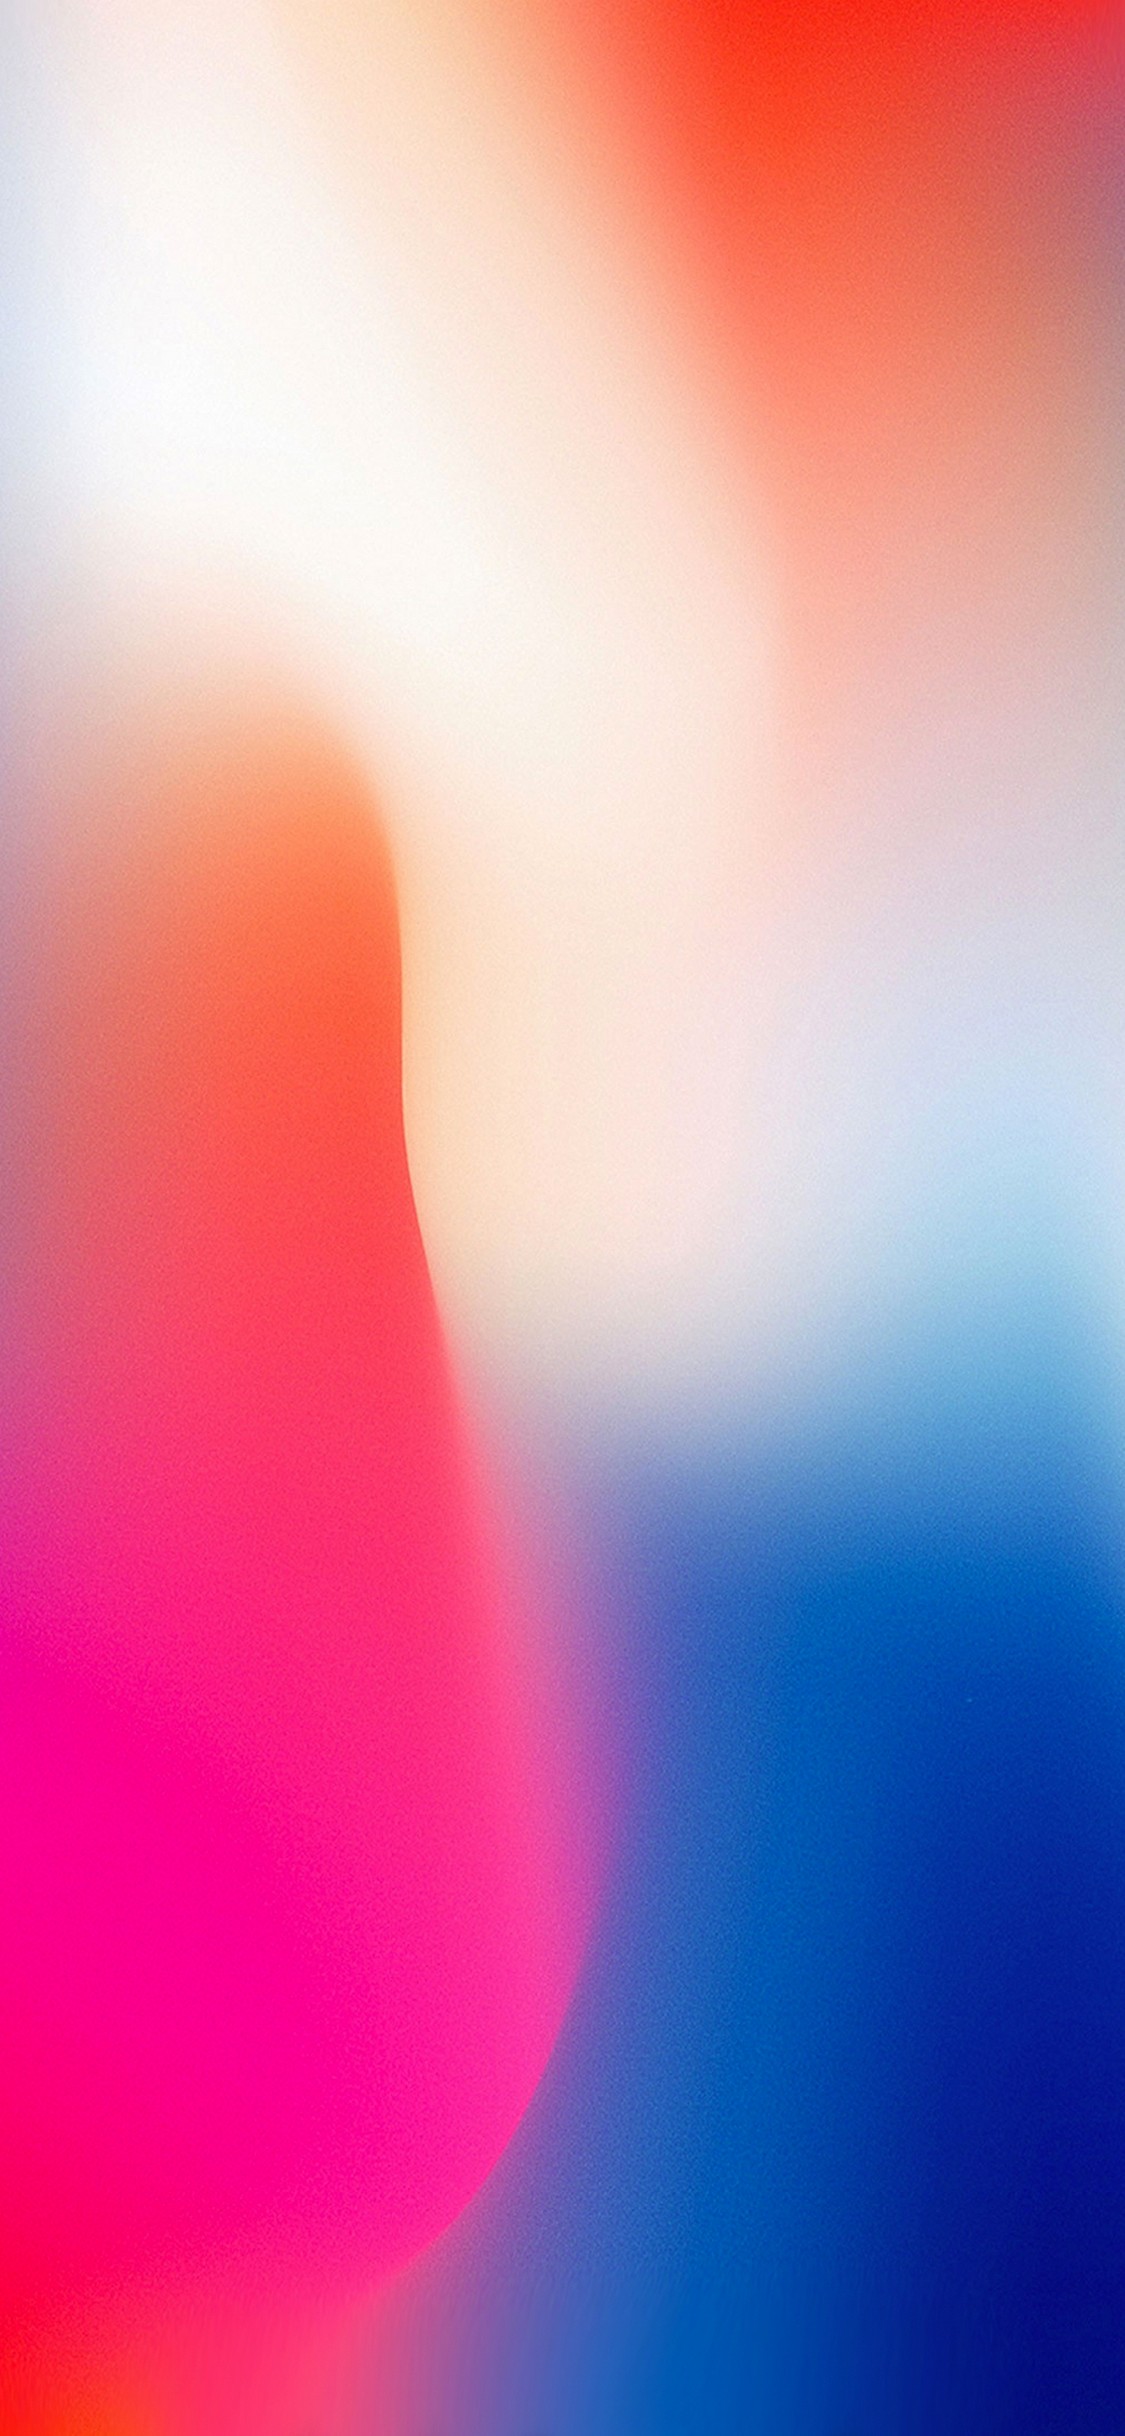 iPhone X Wallpaper New With high-resolution 1125X2436 pixel. You can set as wallpaper for Apple iPhone X, XS Max, XR, 8, 7, 6, SE, iPad. Enjoy and share your favorite HD wallpapers and background images